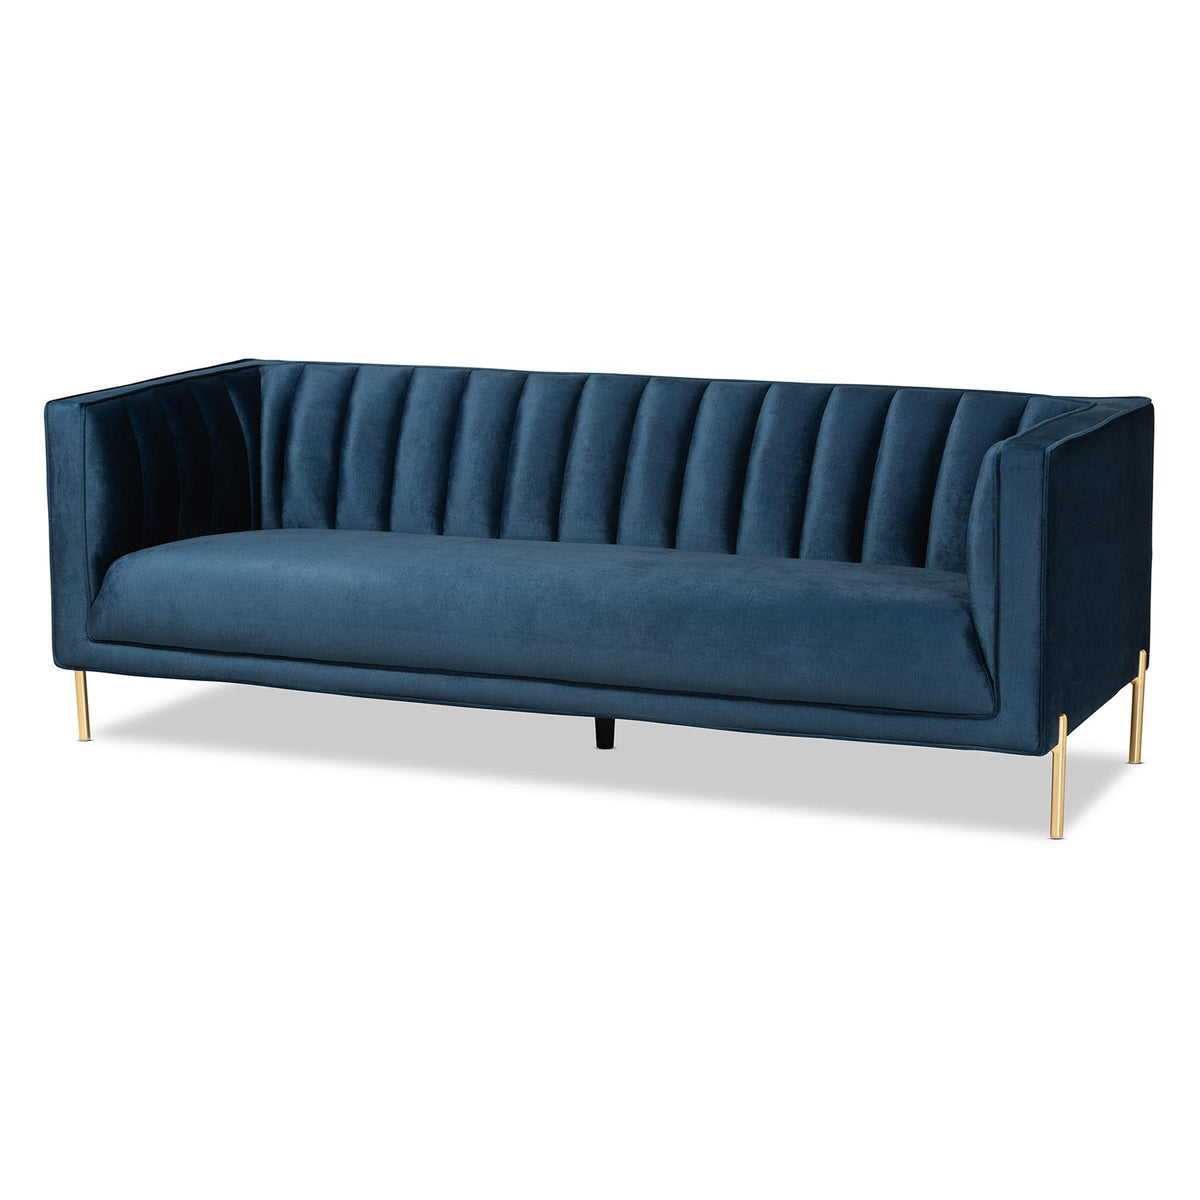 Baxton Studio Maia Contemporary Glam And Luxe Navy Blue Velvet Fabric Upholstered And Gold Finished Metal Sofa - 5016D-Navy Blue Velvet-Sofa